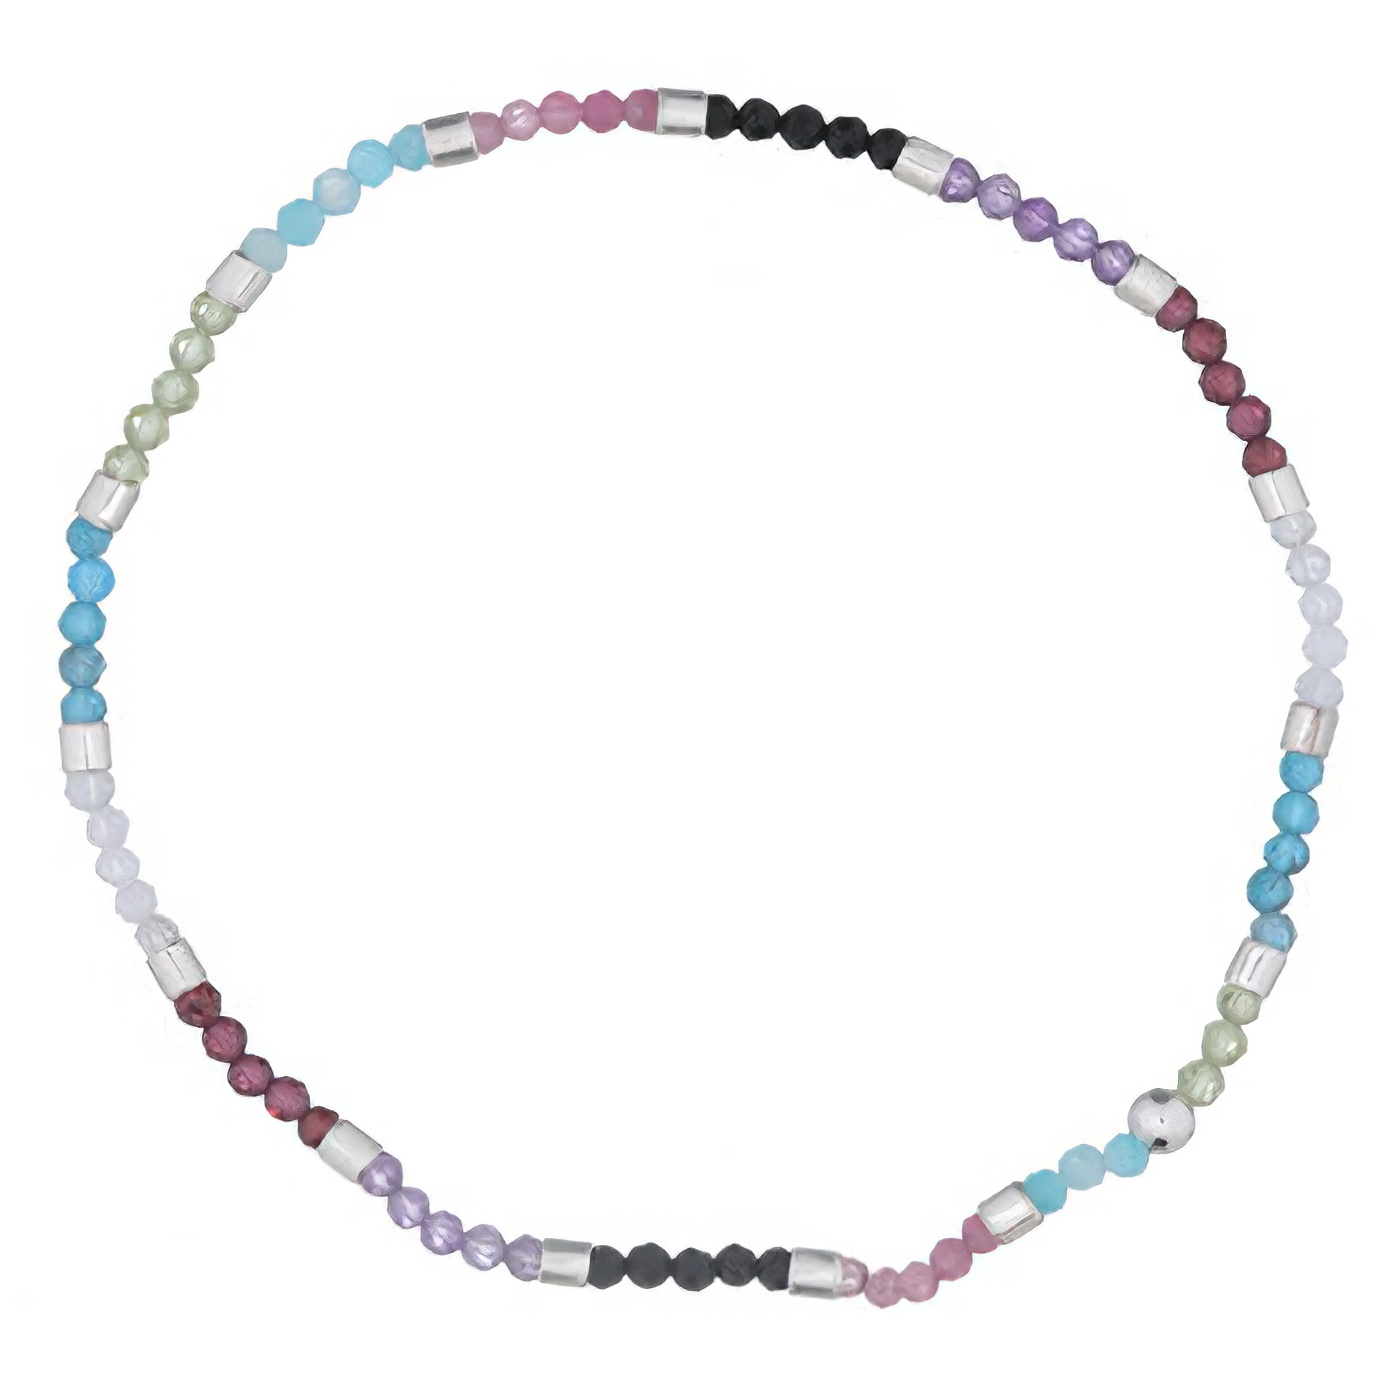 Enchanting Mixed Stones Stretchable Bracelet With 925 Silver Spacer by BeYindi 